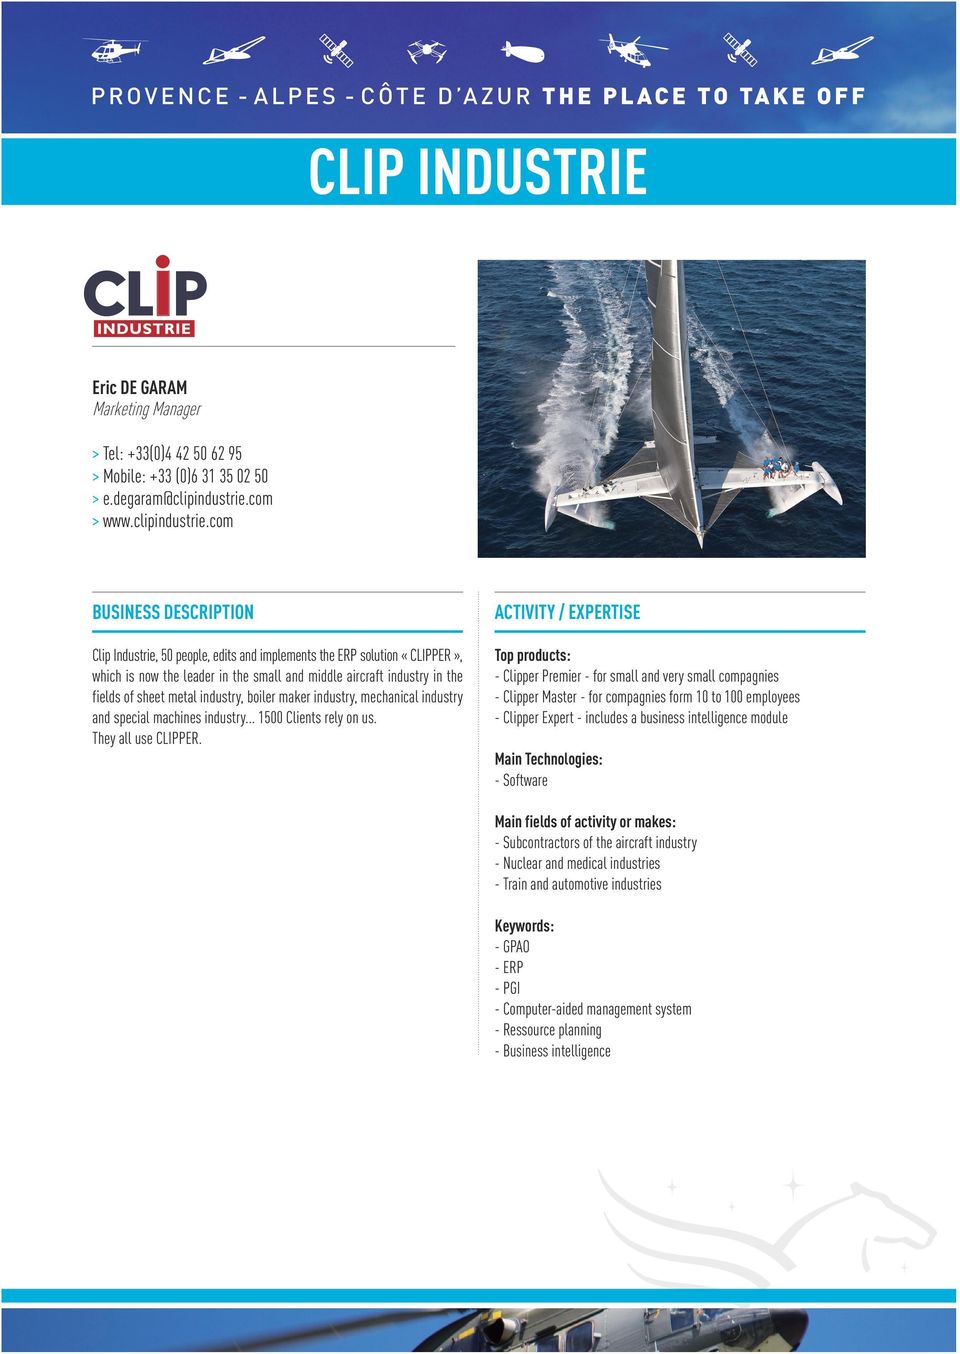 com Business description Clip Industrie, 50 people, edits and implements the ERP solution «CLIPPER», which is now the leader in the small and middle aircraft industry in the fields of sheet metal